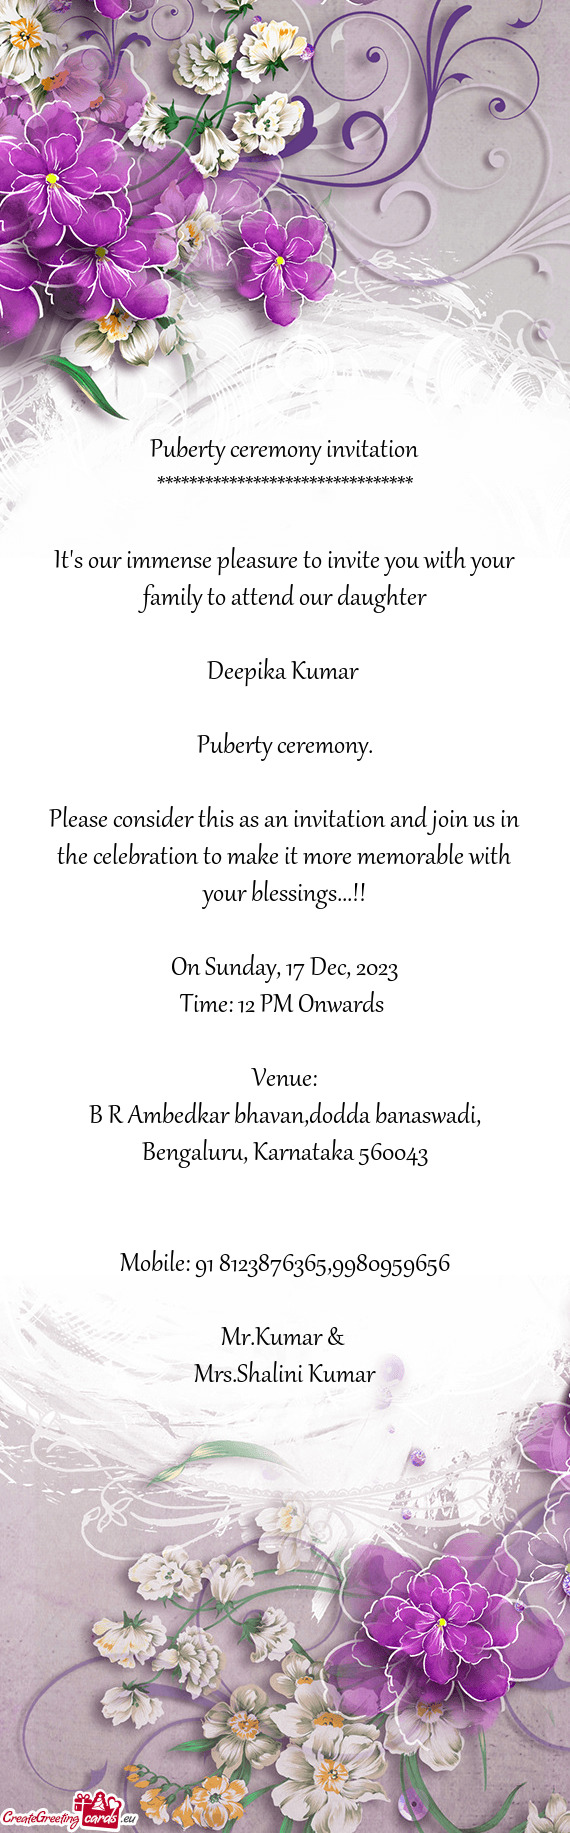 Please consider this as an invitation and join us in the celebration to make it more memorable with